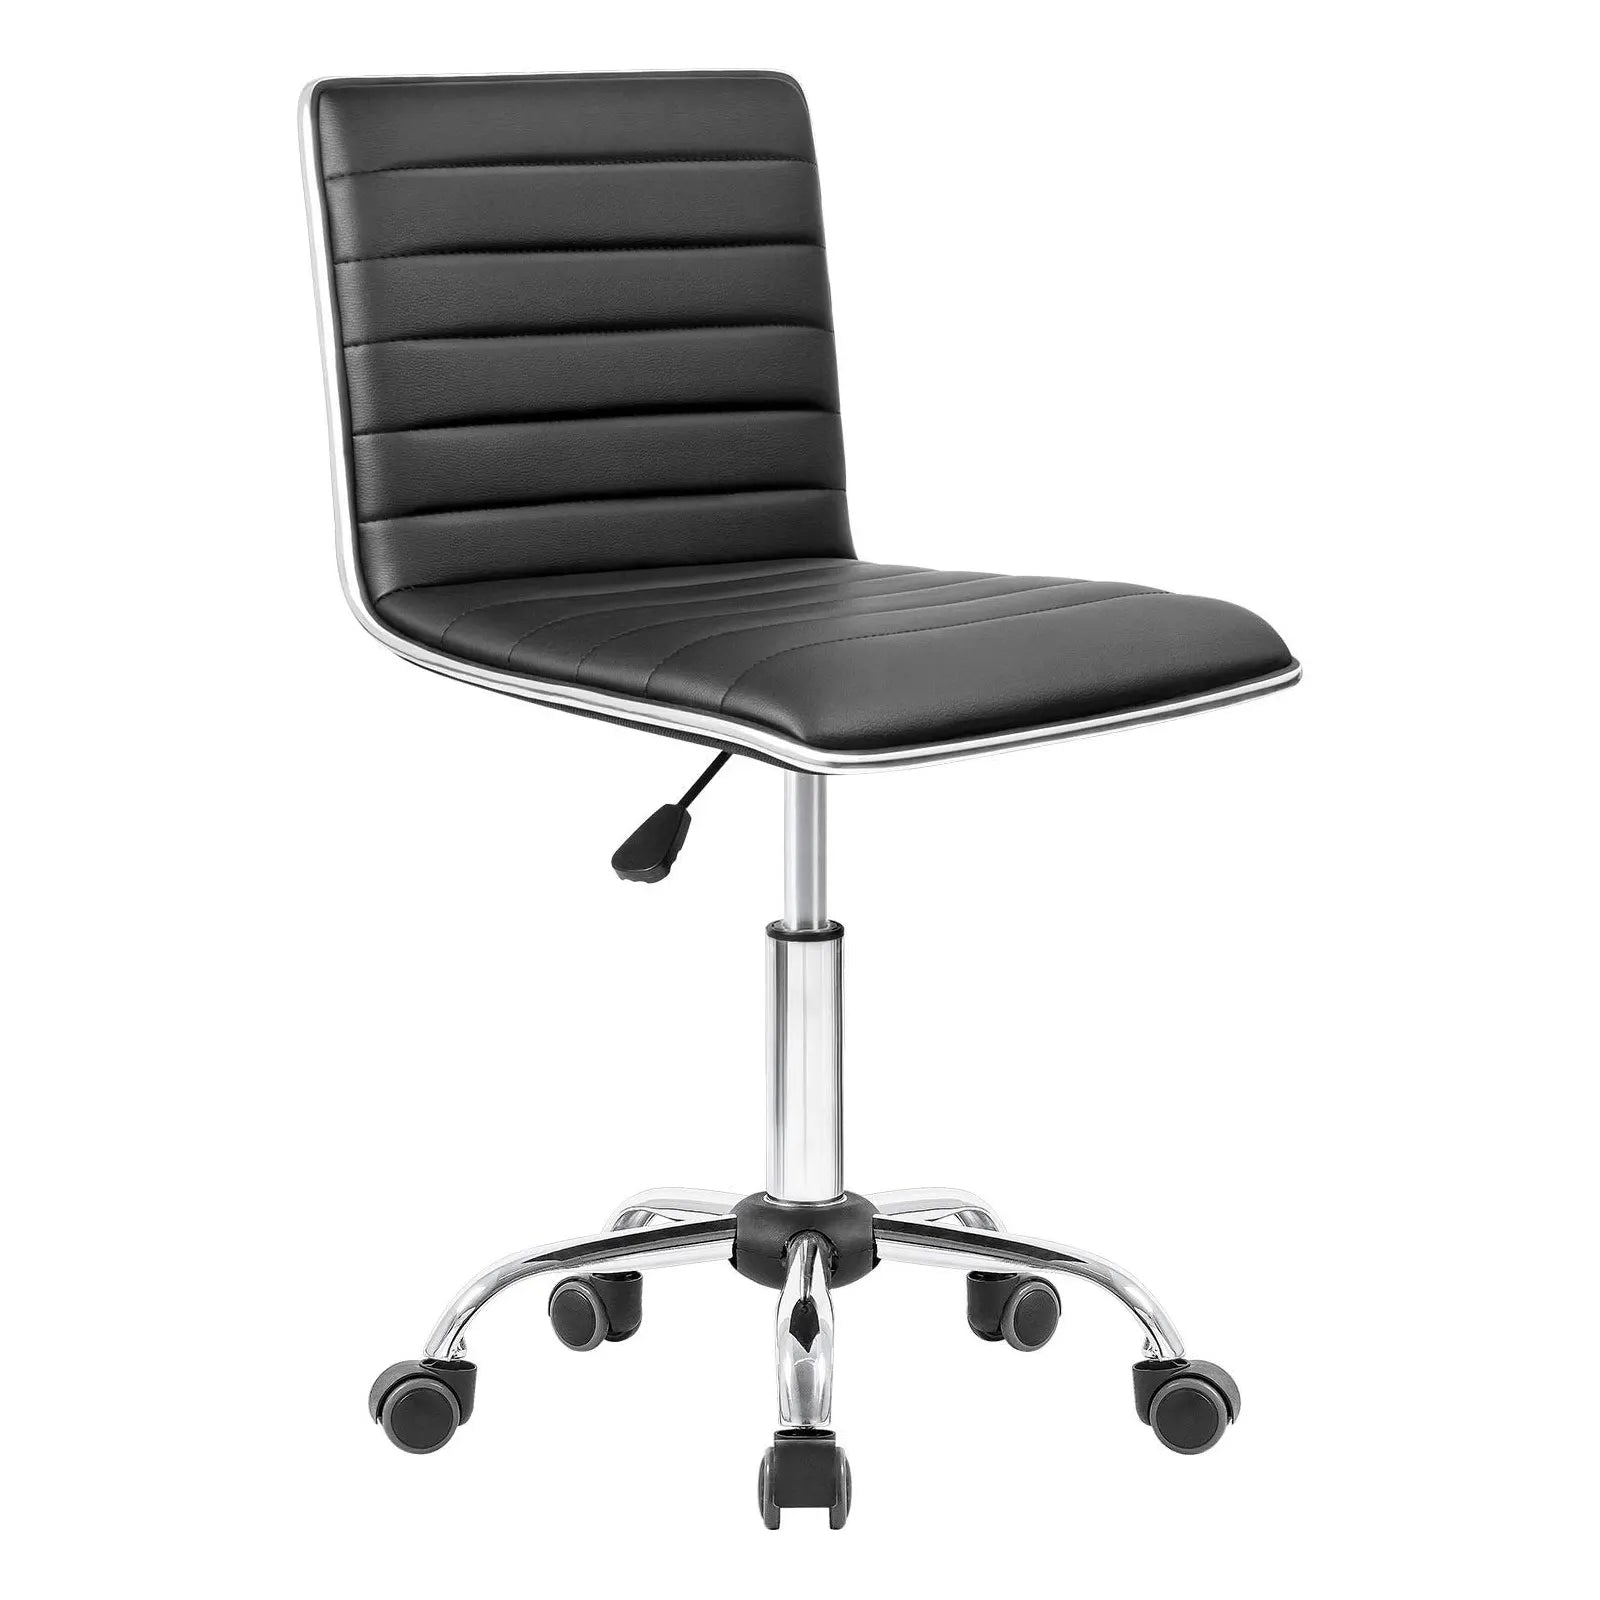 Faux Leather Mid Back Task Chair Swivel Office Desk Chair